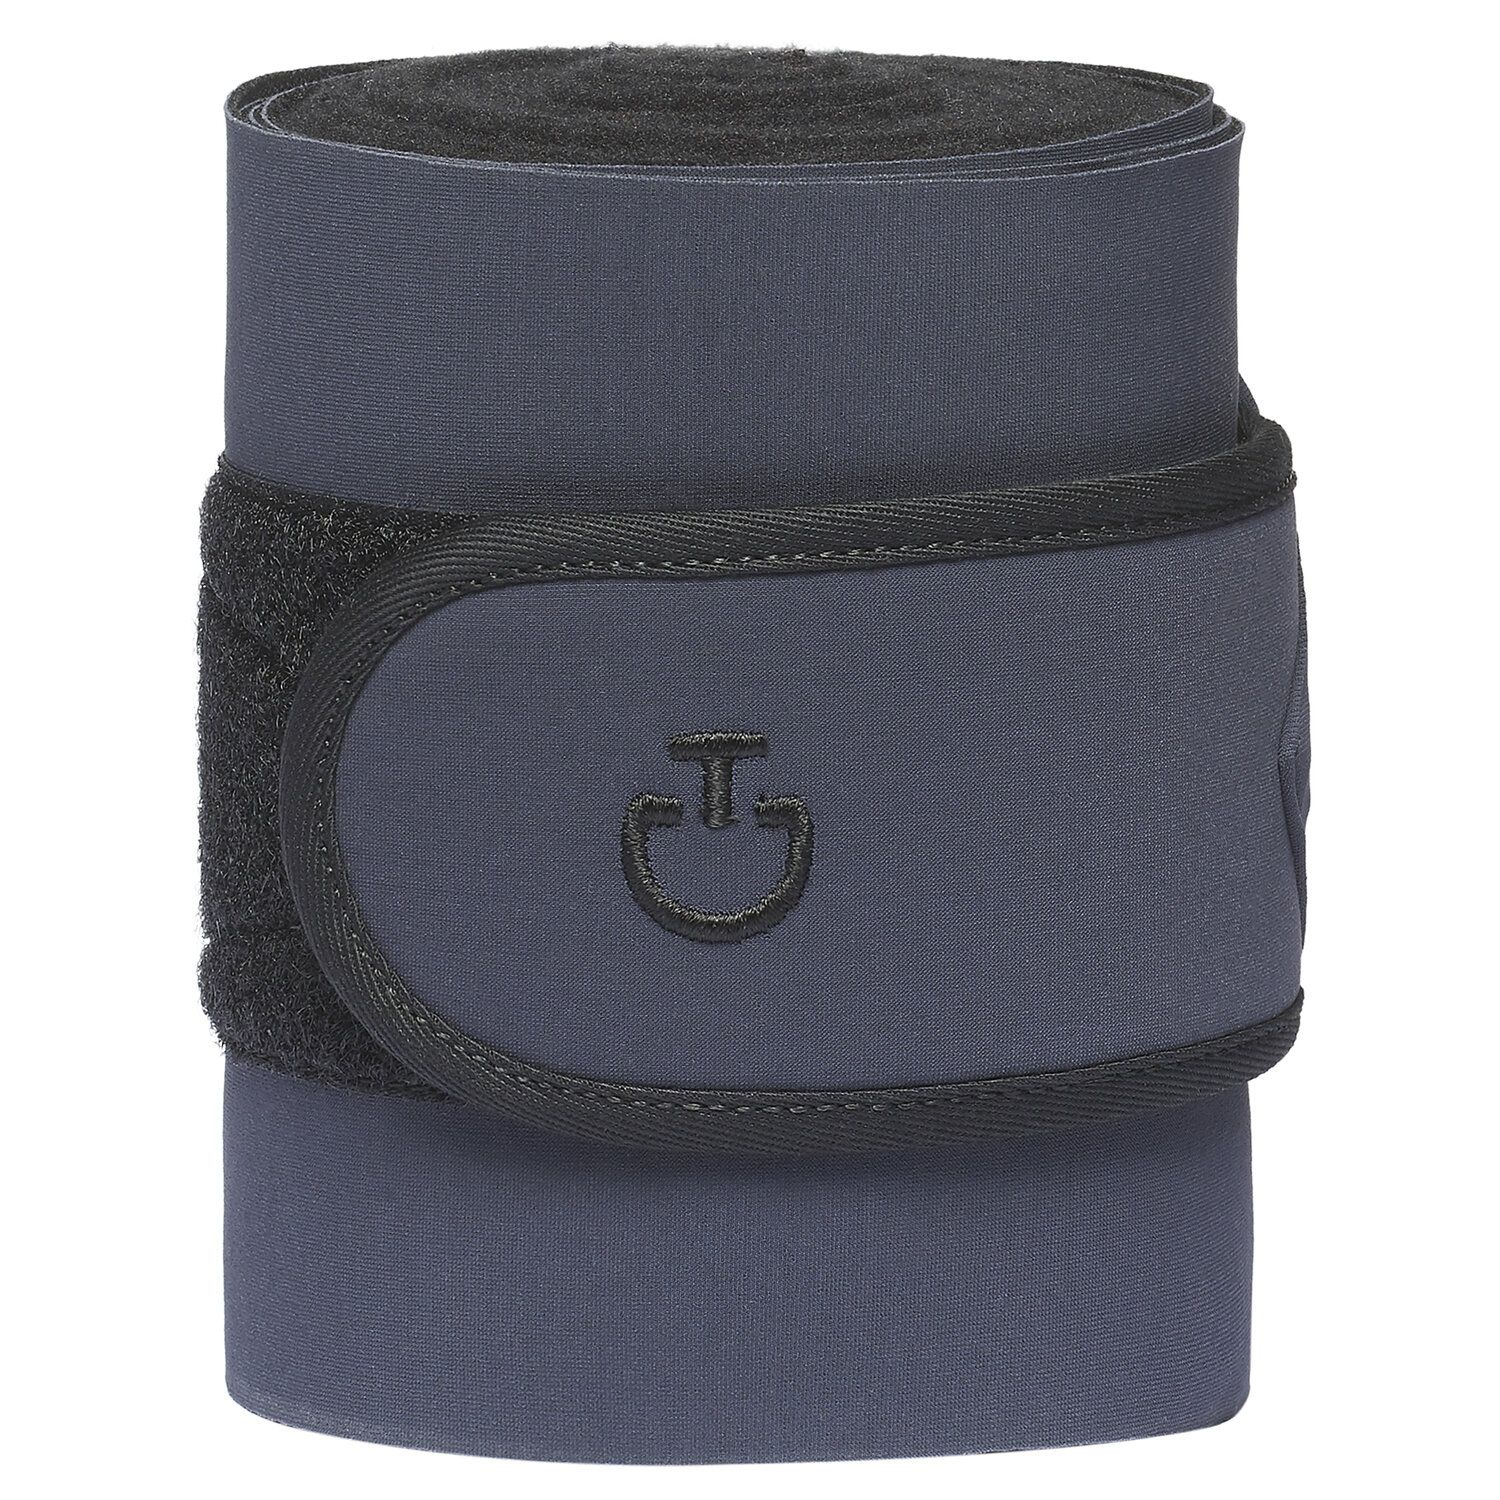 Cavalleria Toscana Set of 4 jersey and fleece bandages. 997A-2